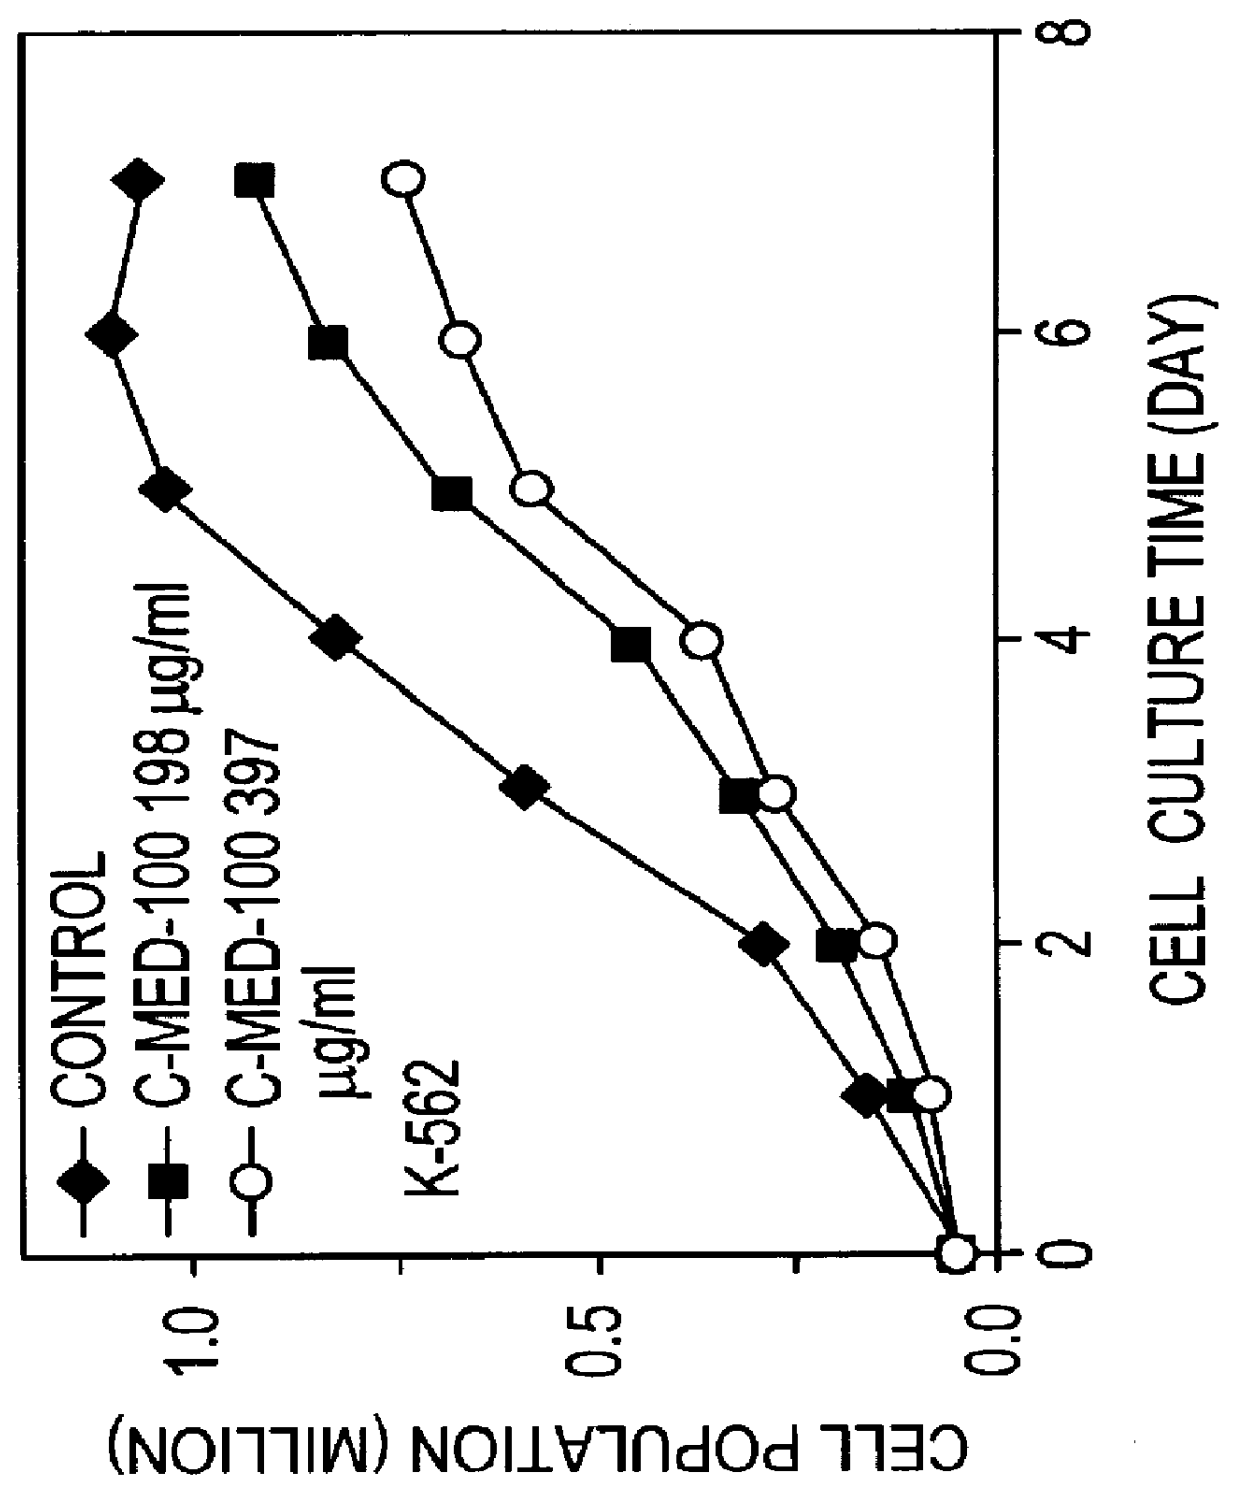 Method of preparation and composition of a water soluble extract of the plant species uncaria